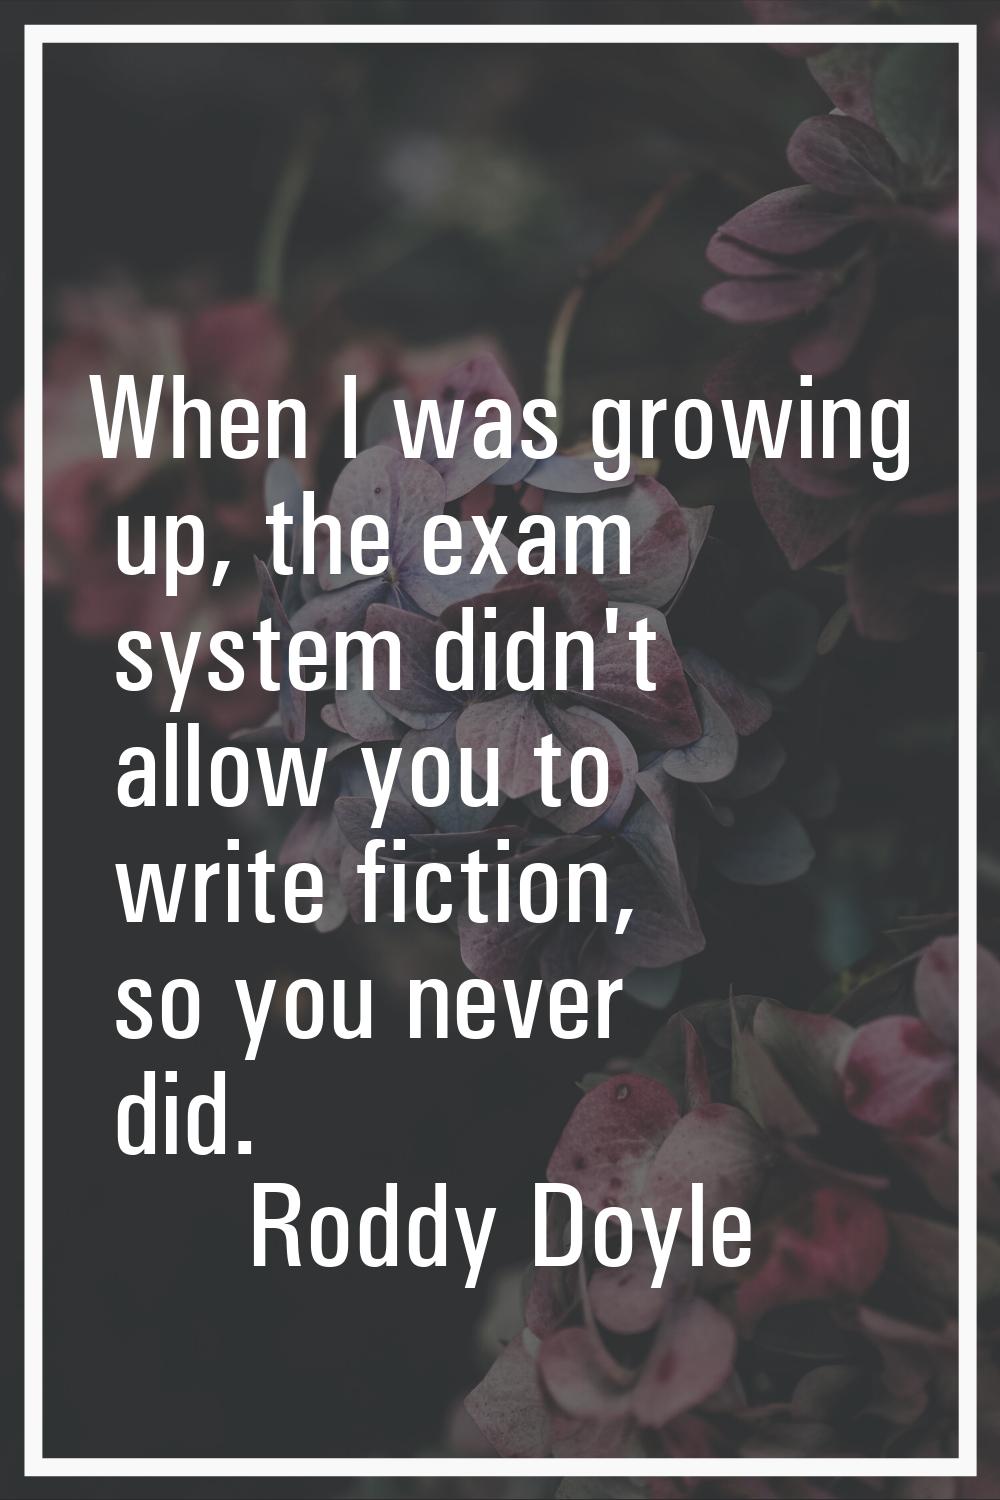 When I was growing up, the exam system didn't allow you to write fiction, so you never did.